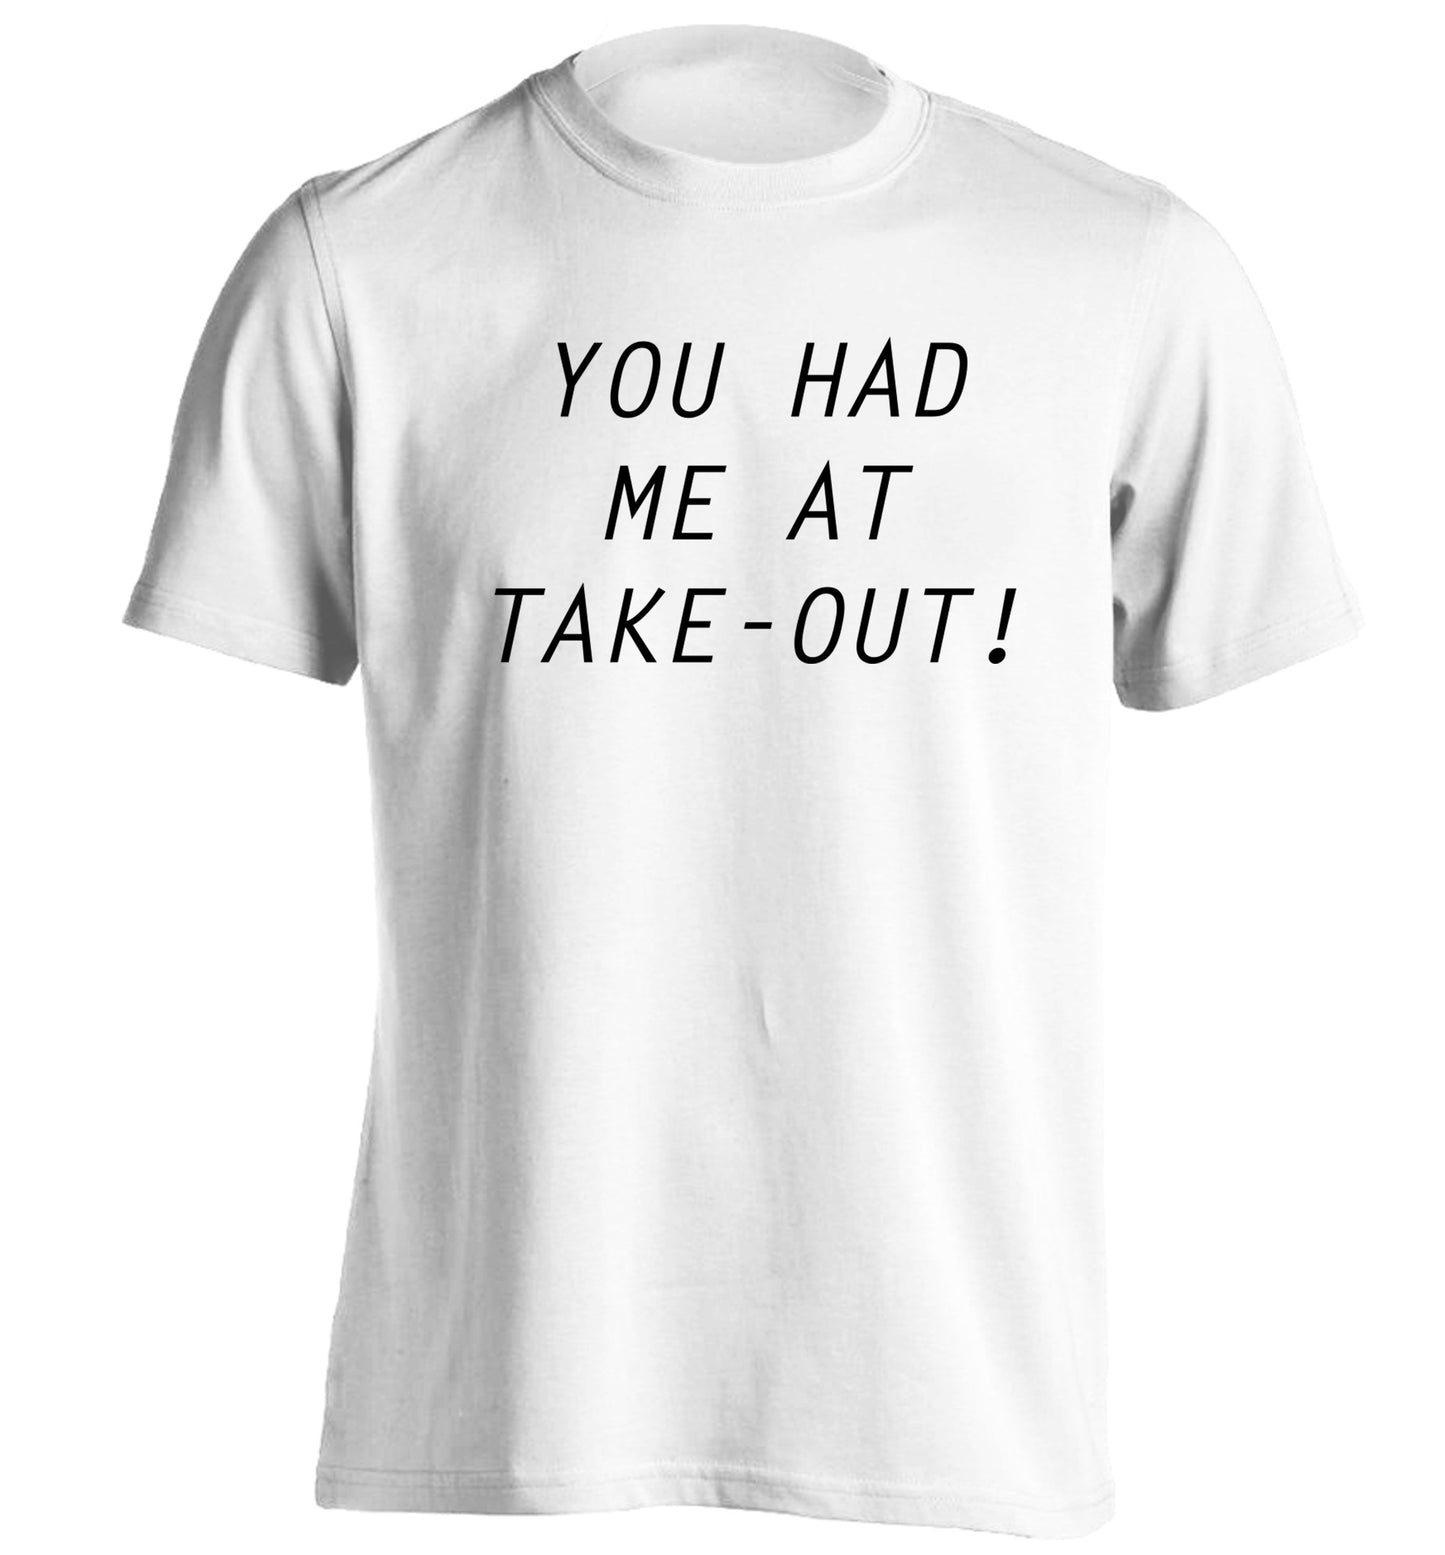 You had me at take-out adults unisex white Tshirt 2XL